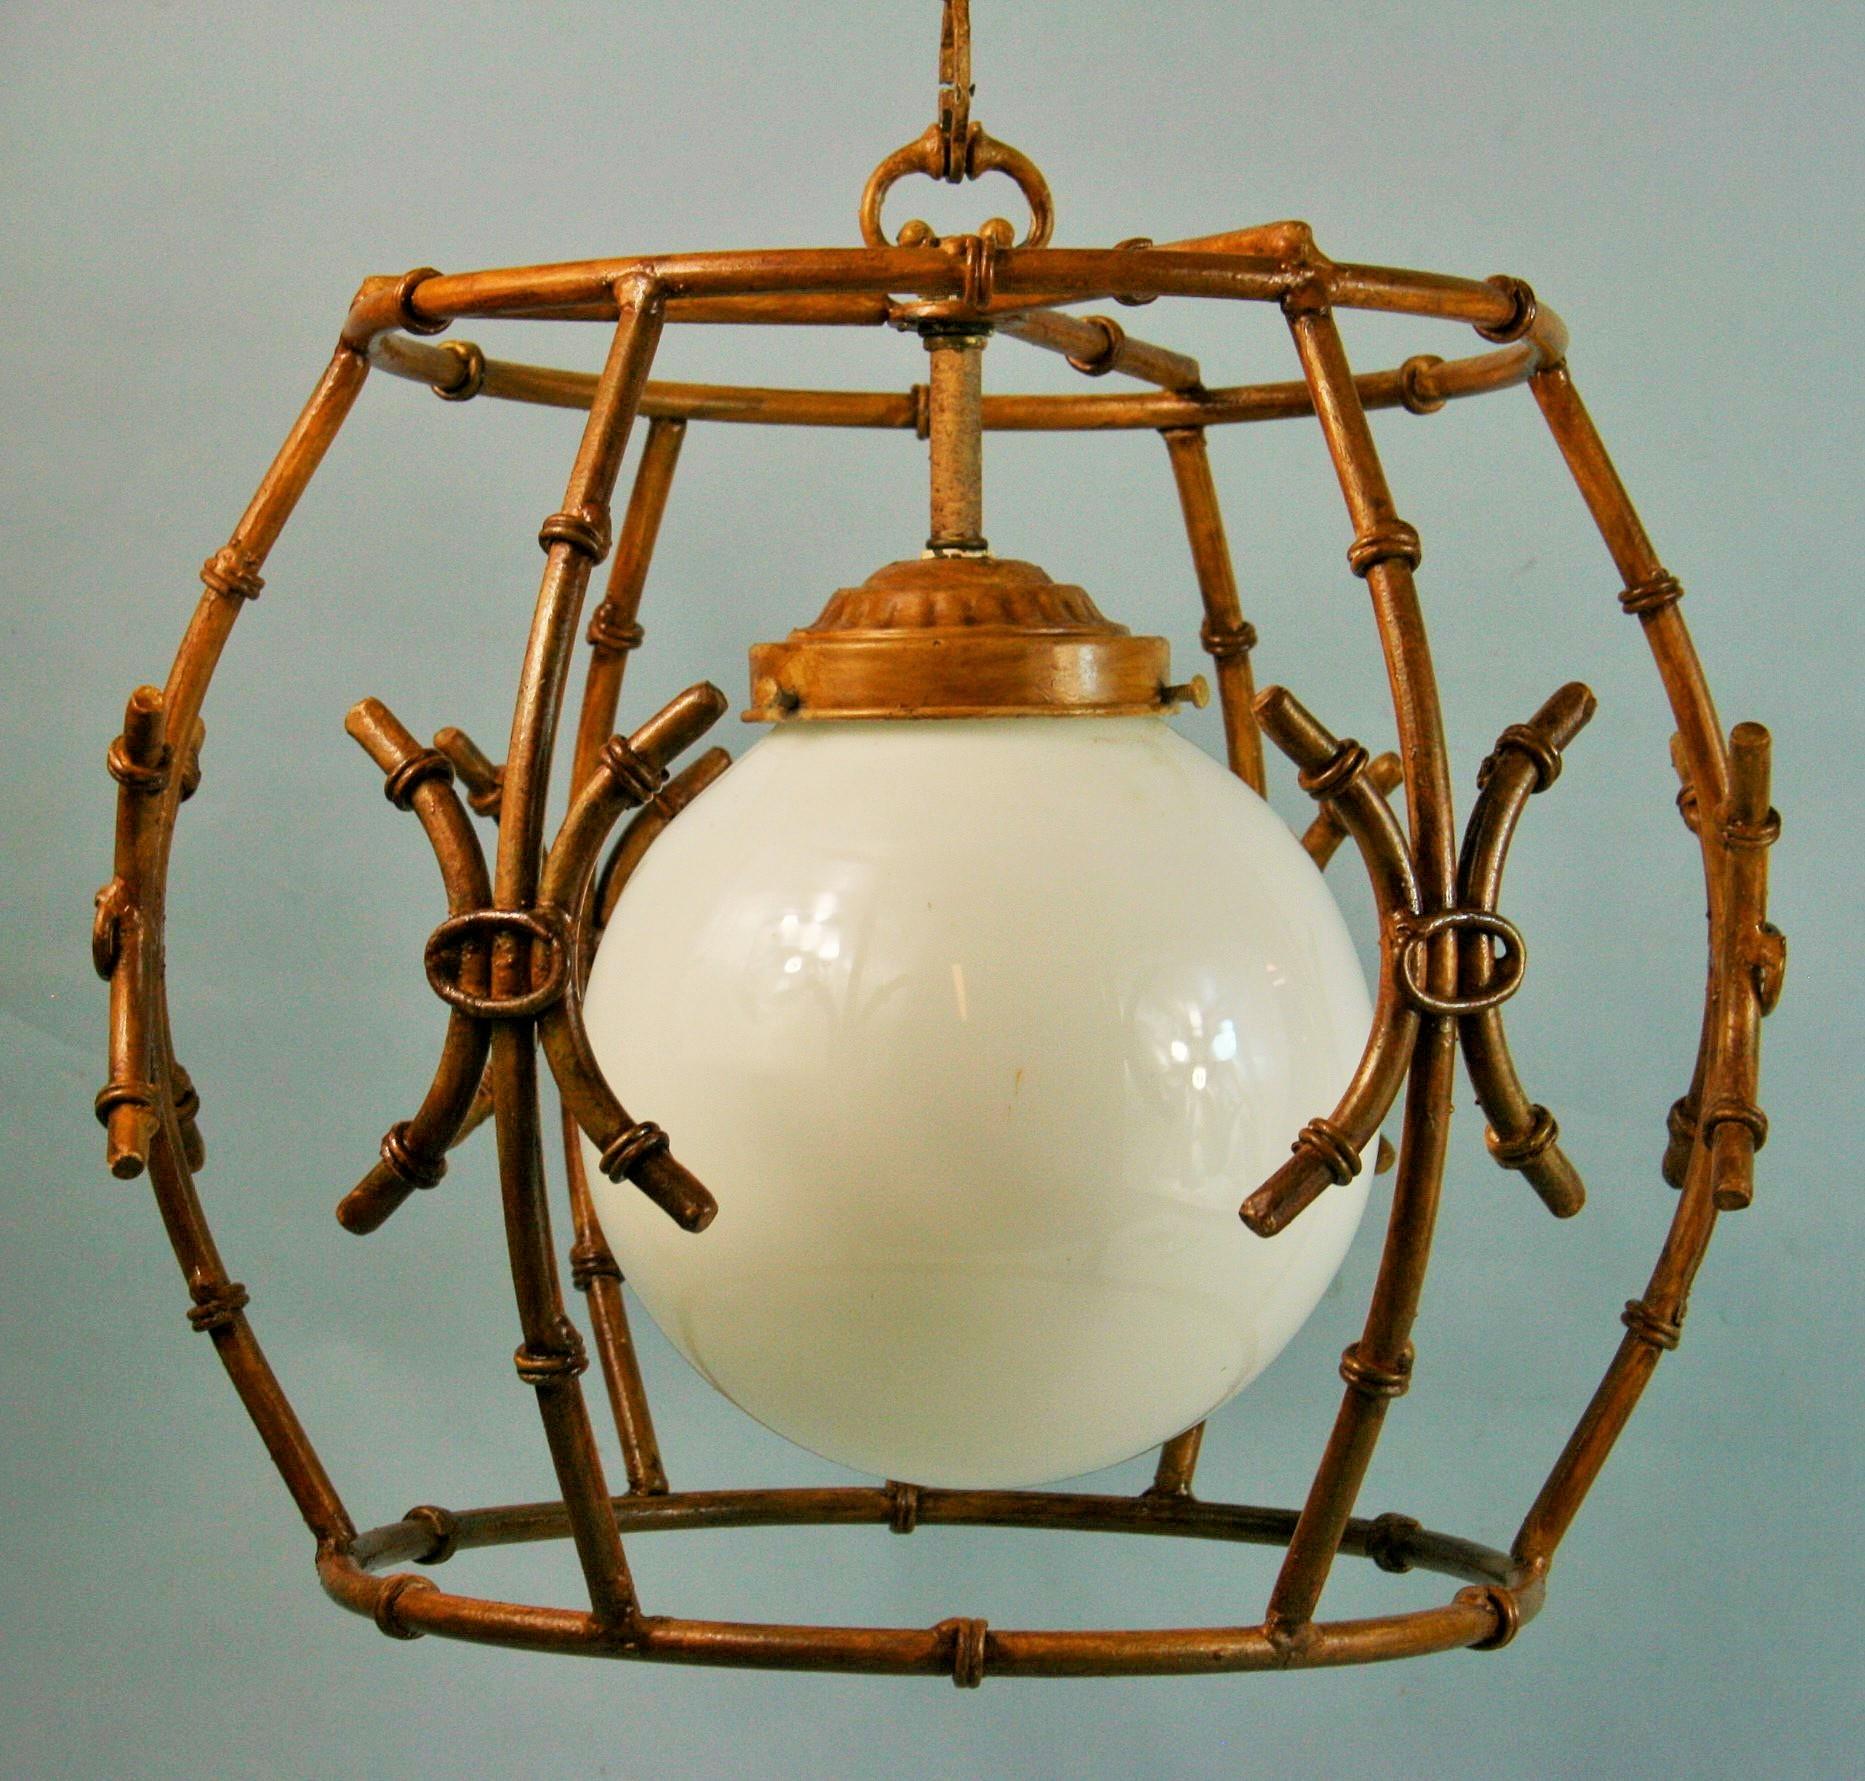 Faux bamboo gilt metal chandelier /pendant with white globe
Takes one 100 watt max Edison based bulb 
Newly rewired
Supplied with 3' chain and canopy
Fixture only dimensions 16.5